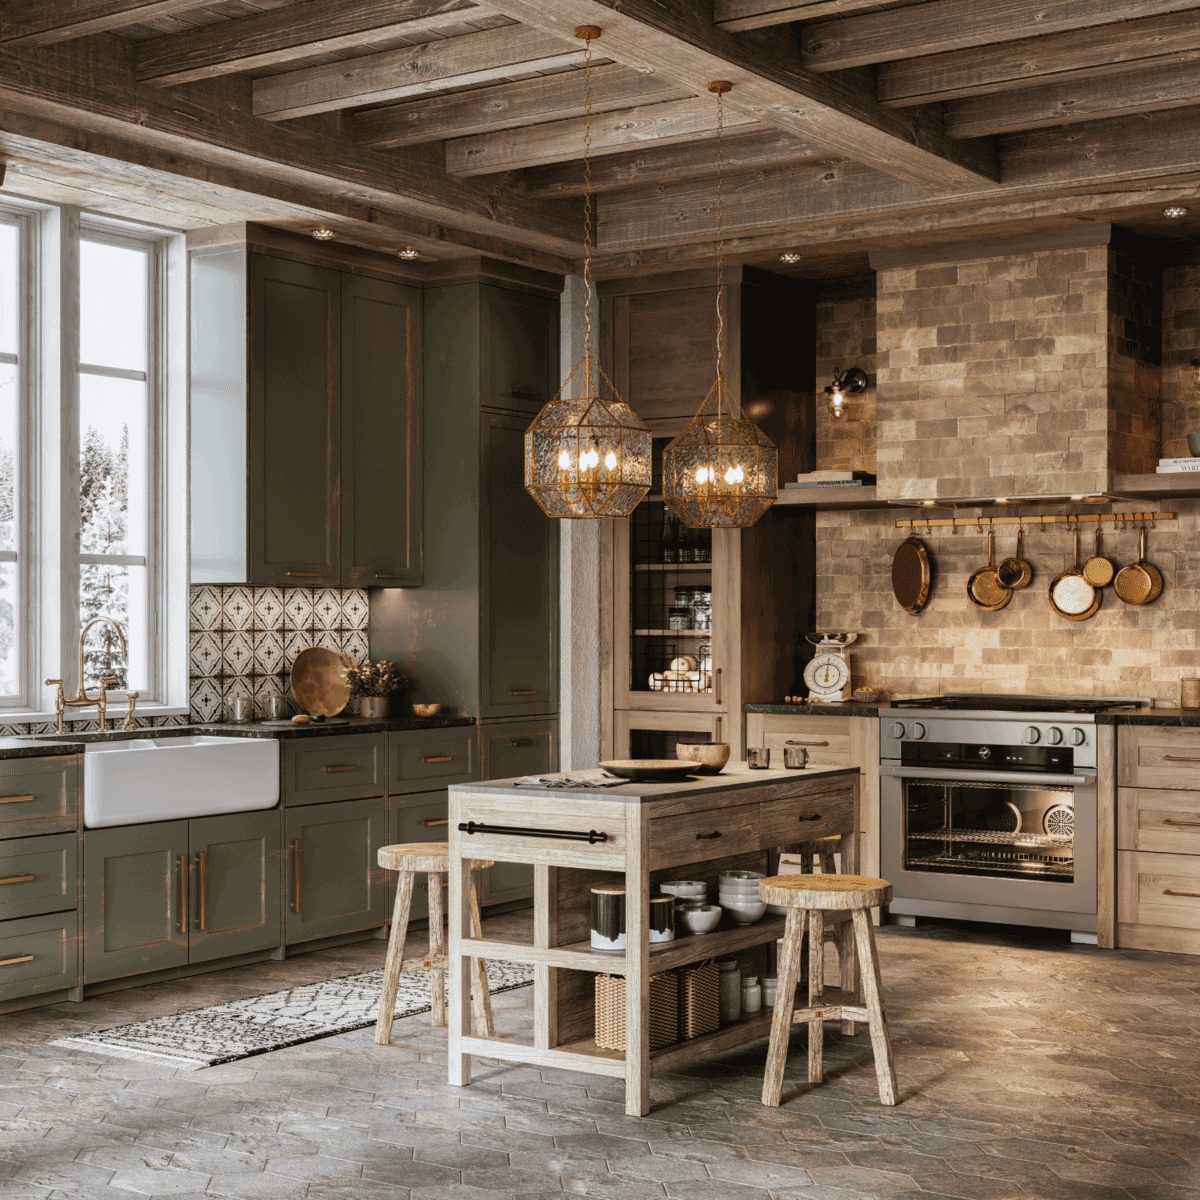 spacious kitchen design of a log house. worn earthy green